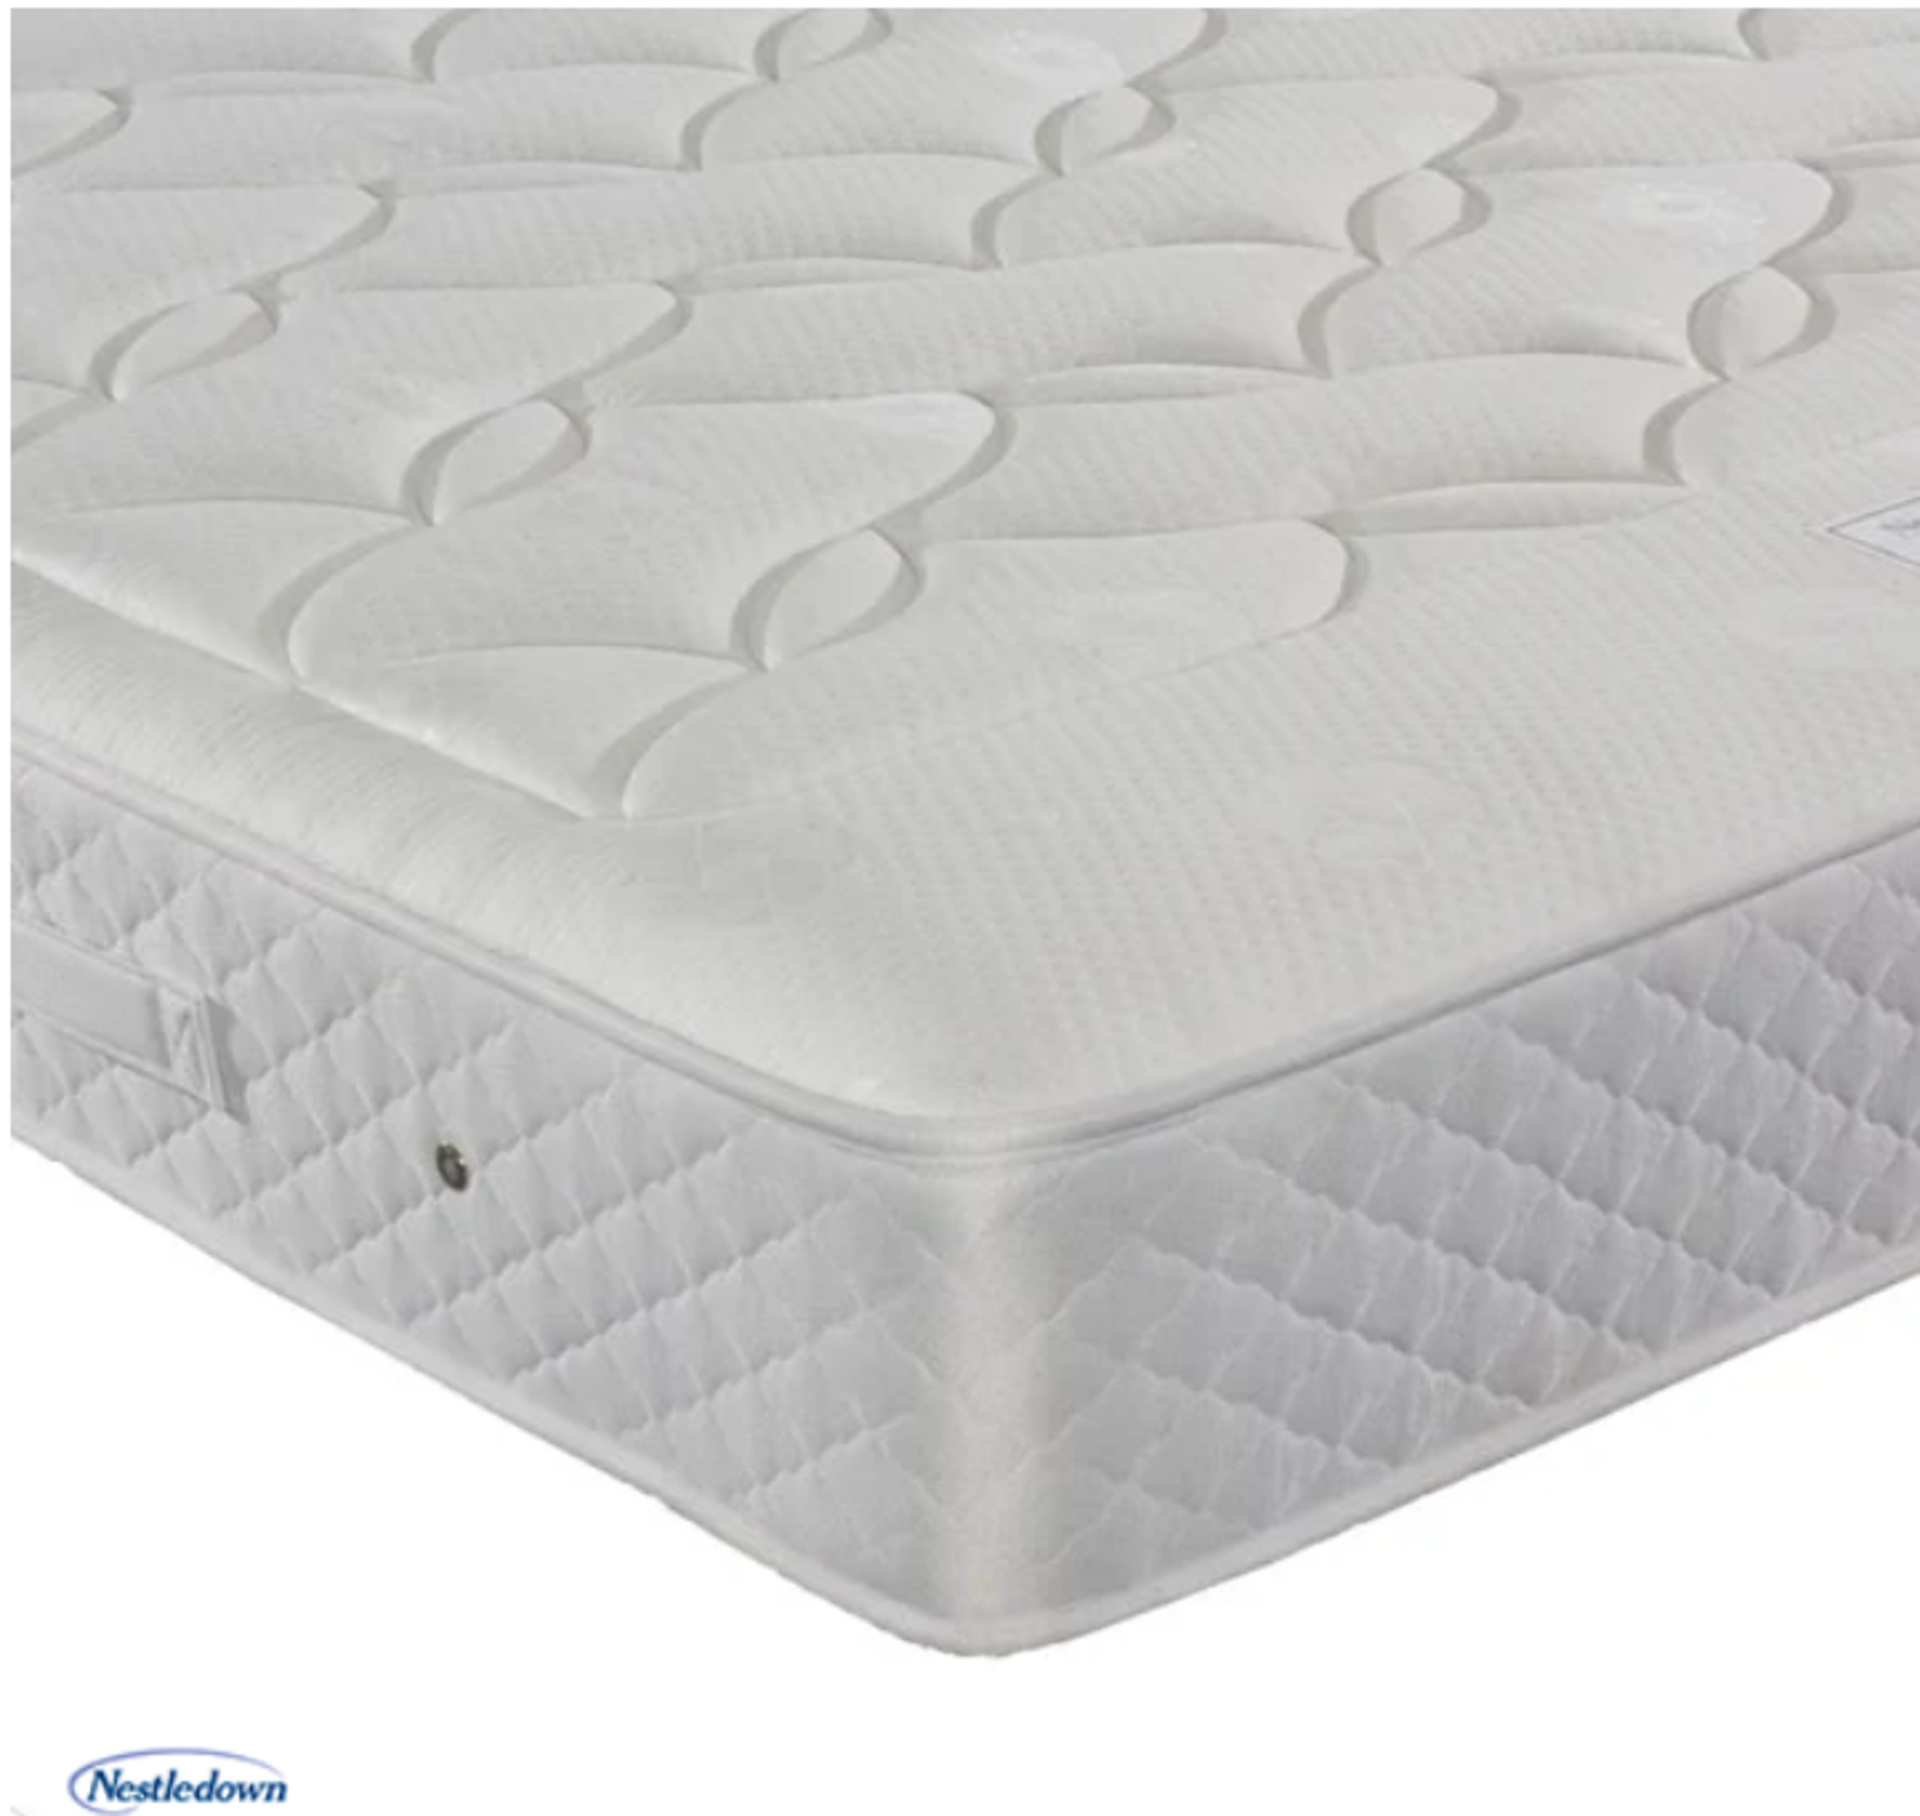 Carpetright NESTLEDOWN MALVERN Bed Mattress 6ft Super King RRP Â£1259.00 - This product has been